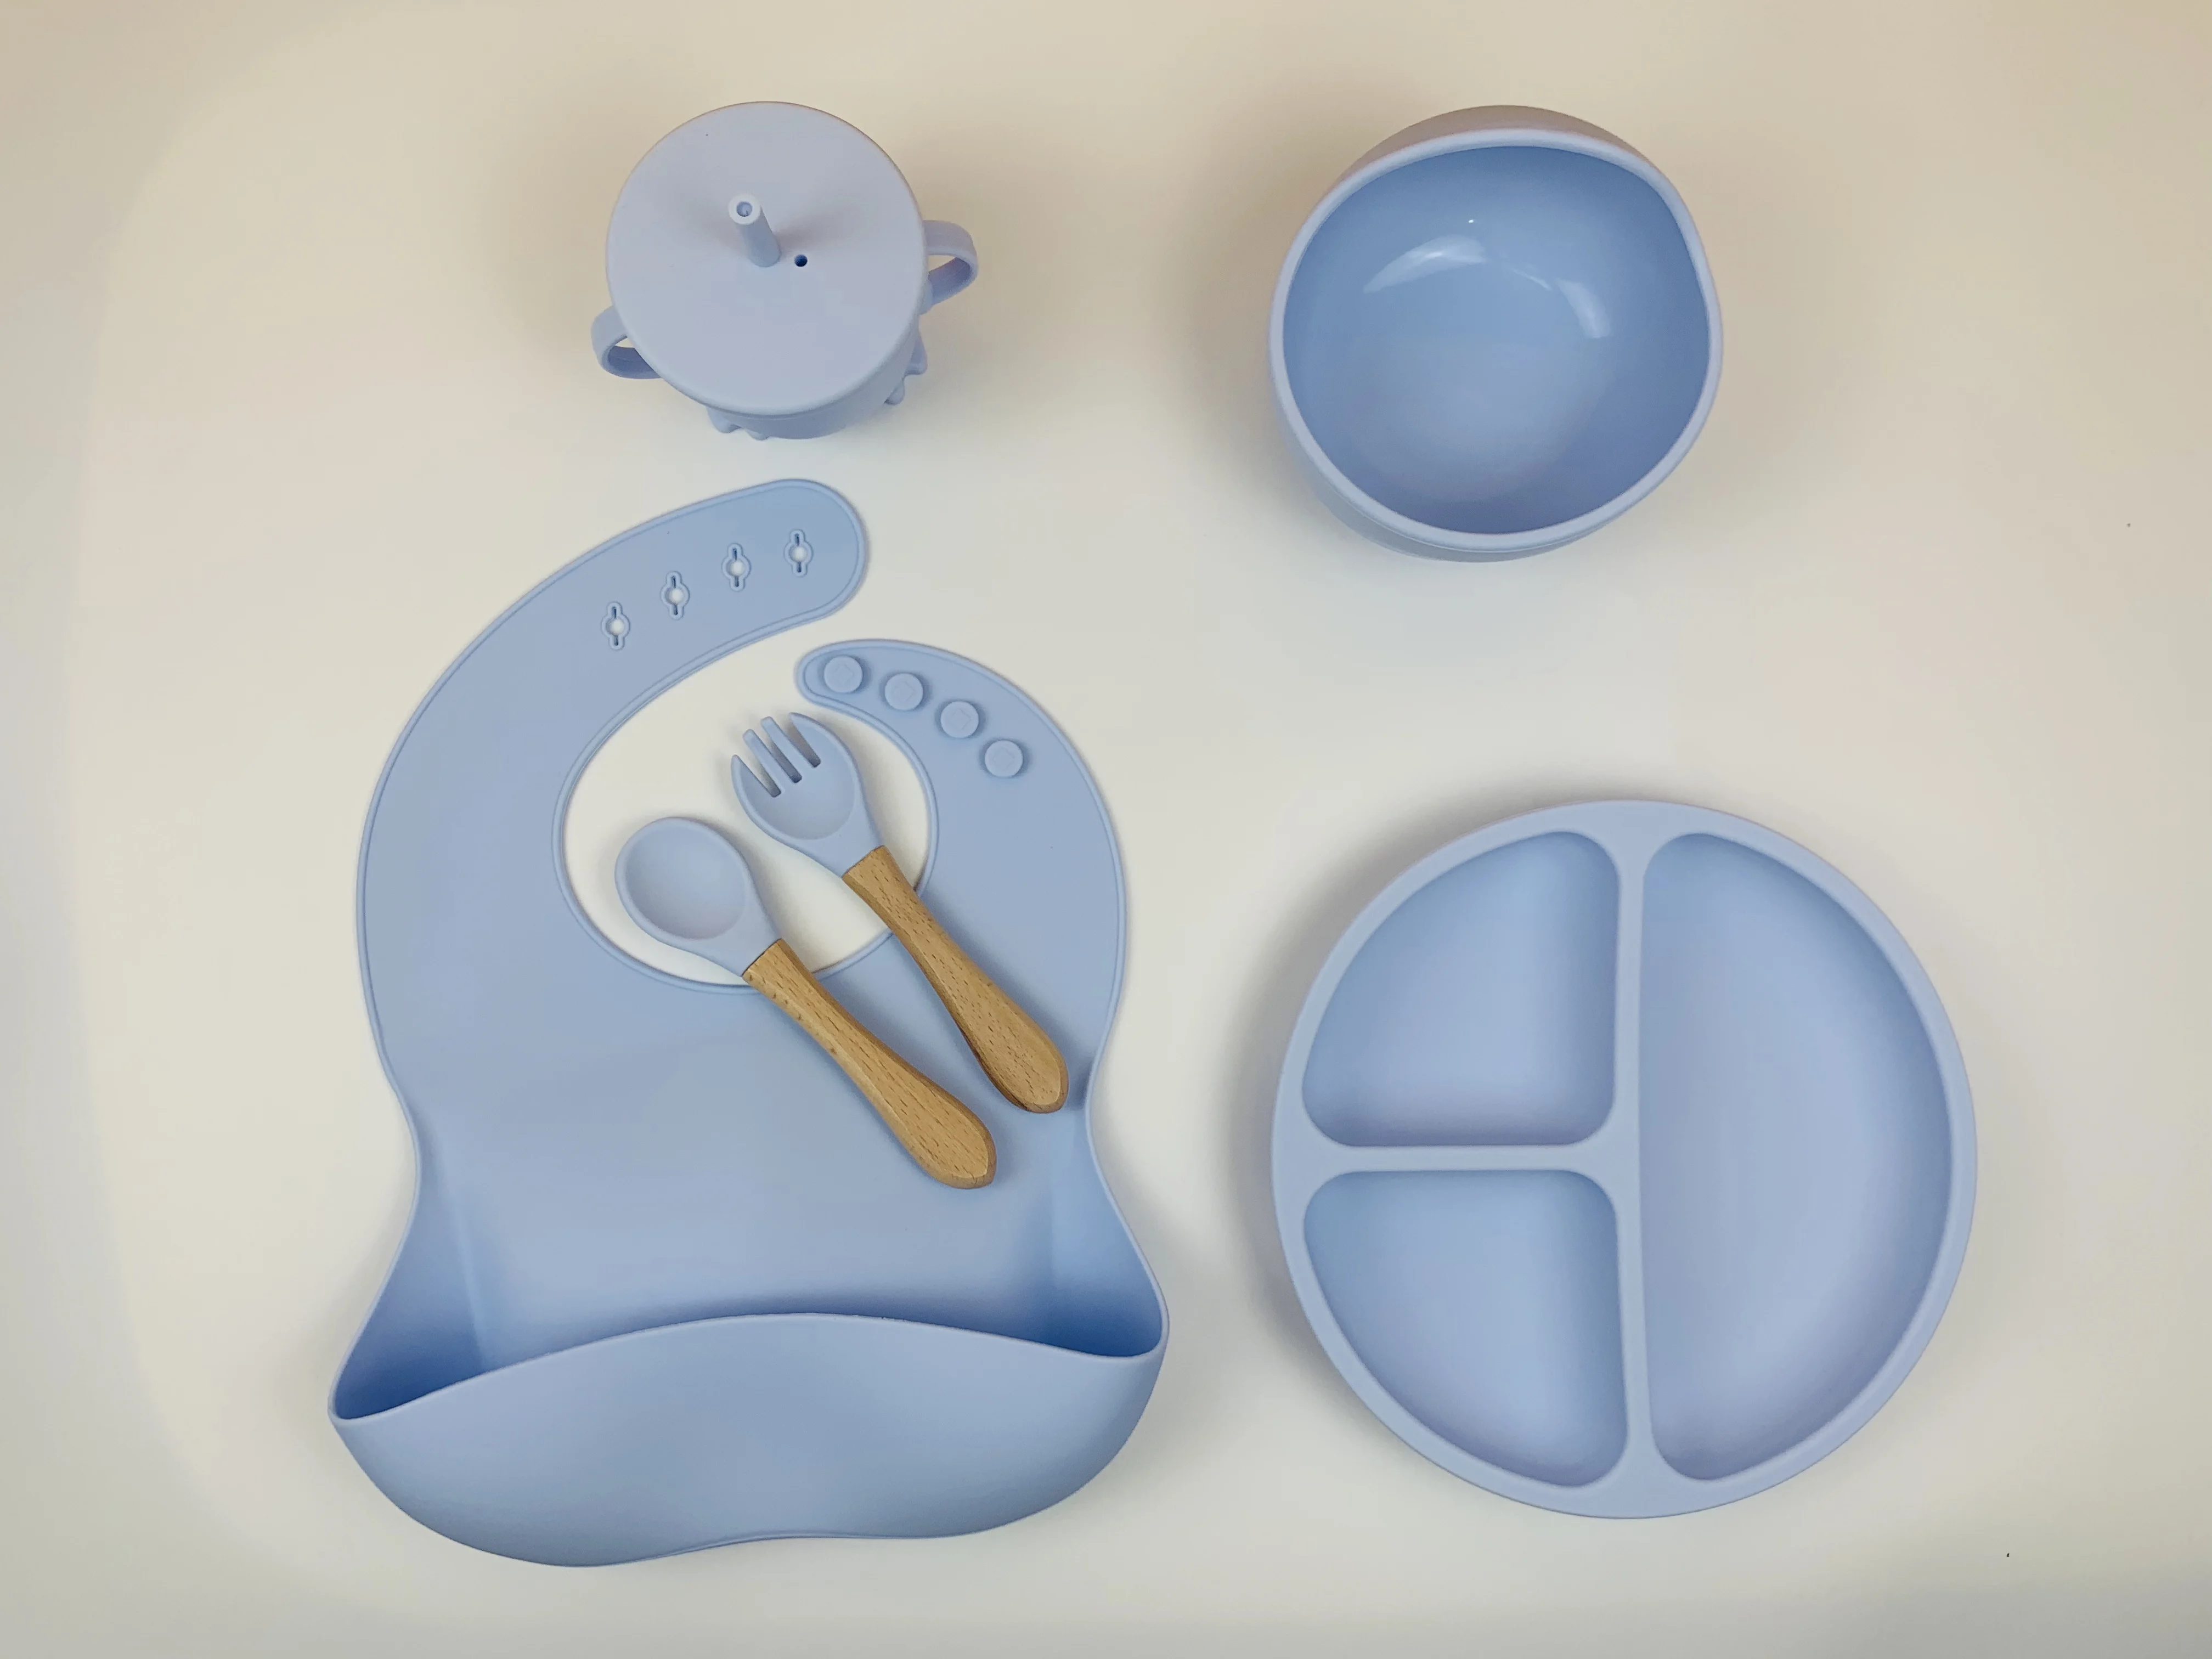 Hot selling silicone baby feeding tableware baby silicone bowl baby eating Bib dinner plate fork spoon water cup set